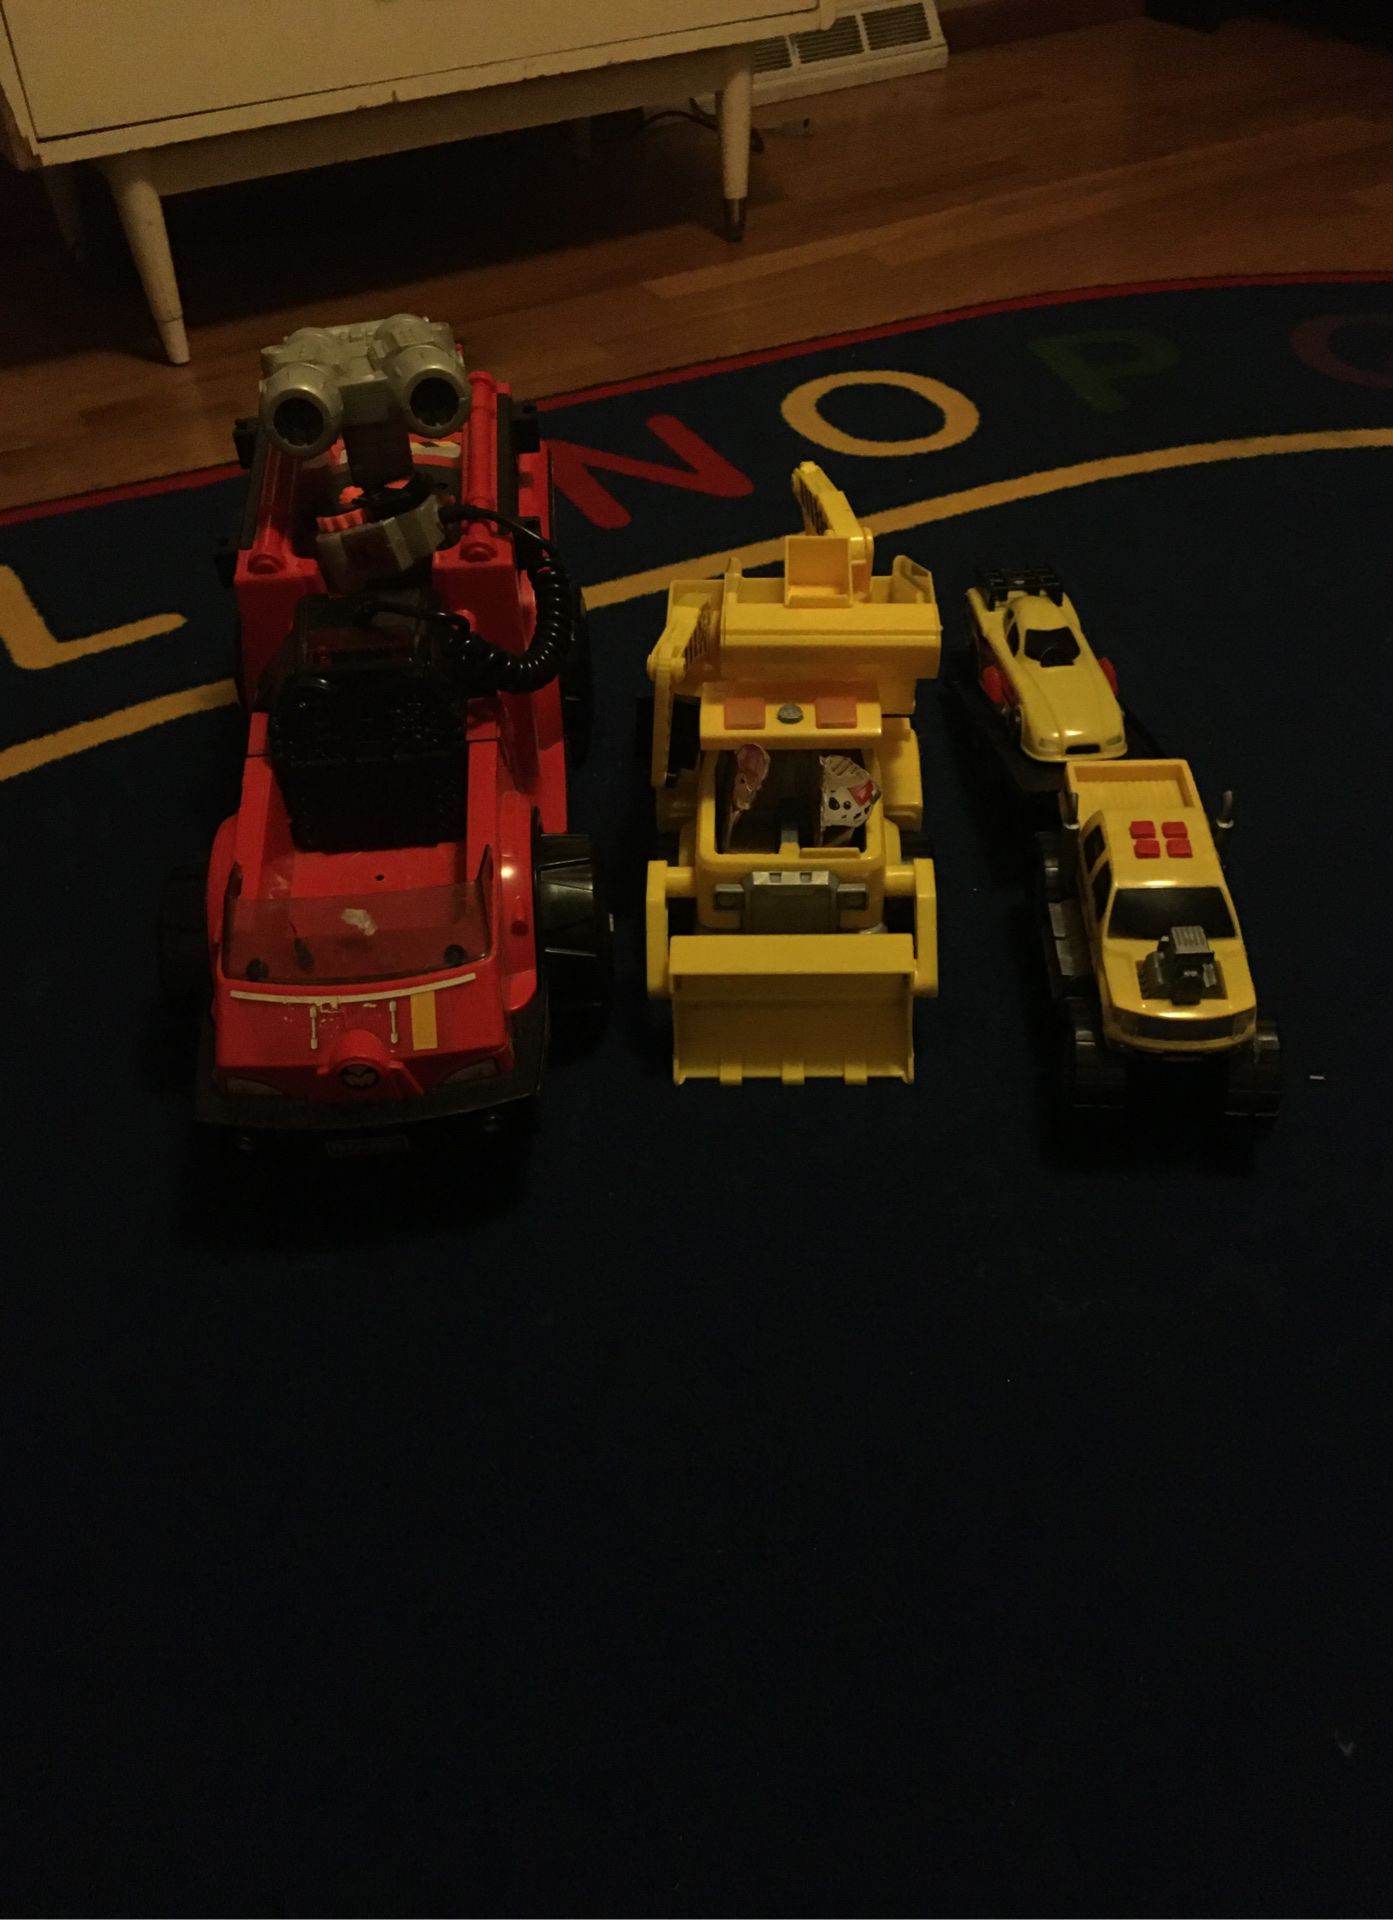 Paw patrol truck , fisher price truck, and random truck with trailer with race car